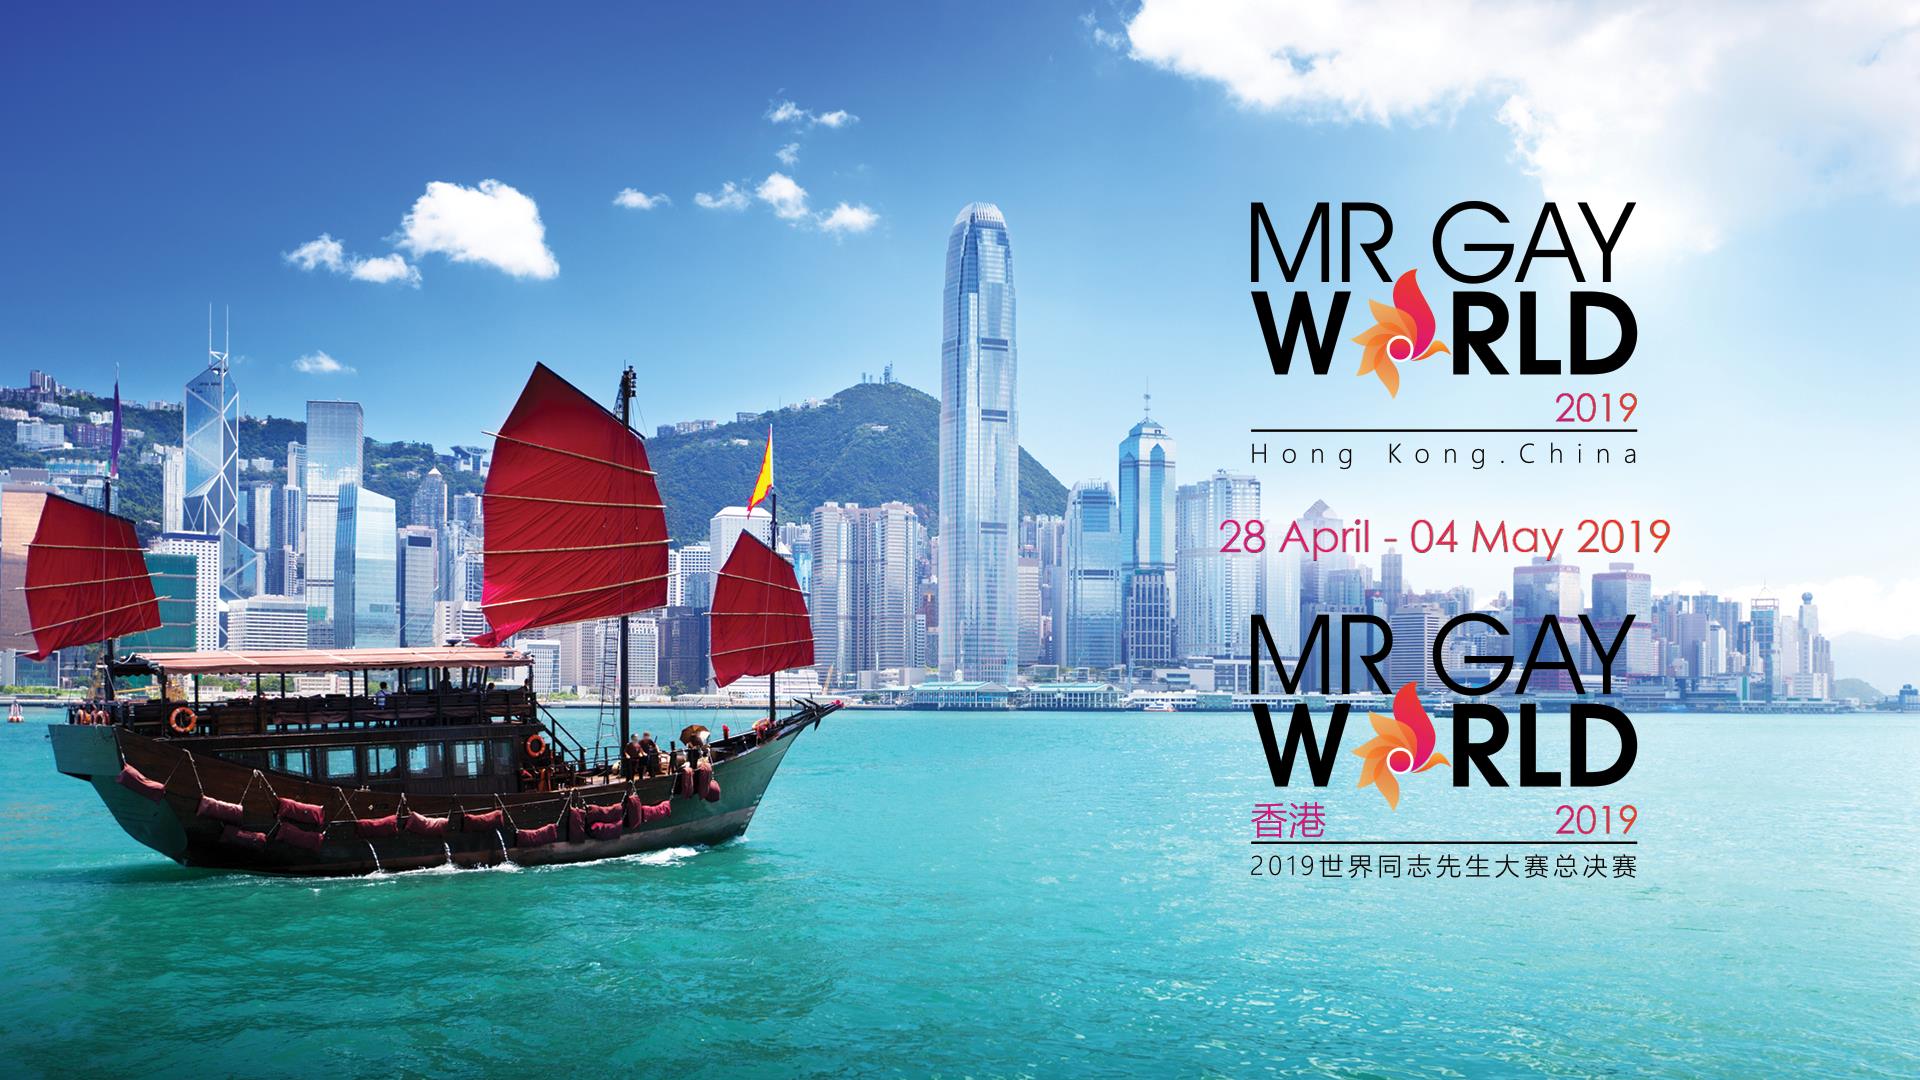 Chinese ‘clampdown’ on LGBTI events forces Mr Gay World 2019 out of Hong Kong